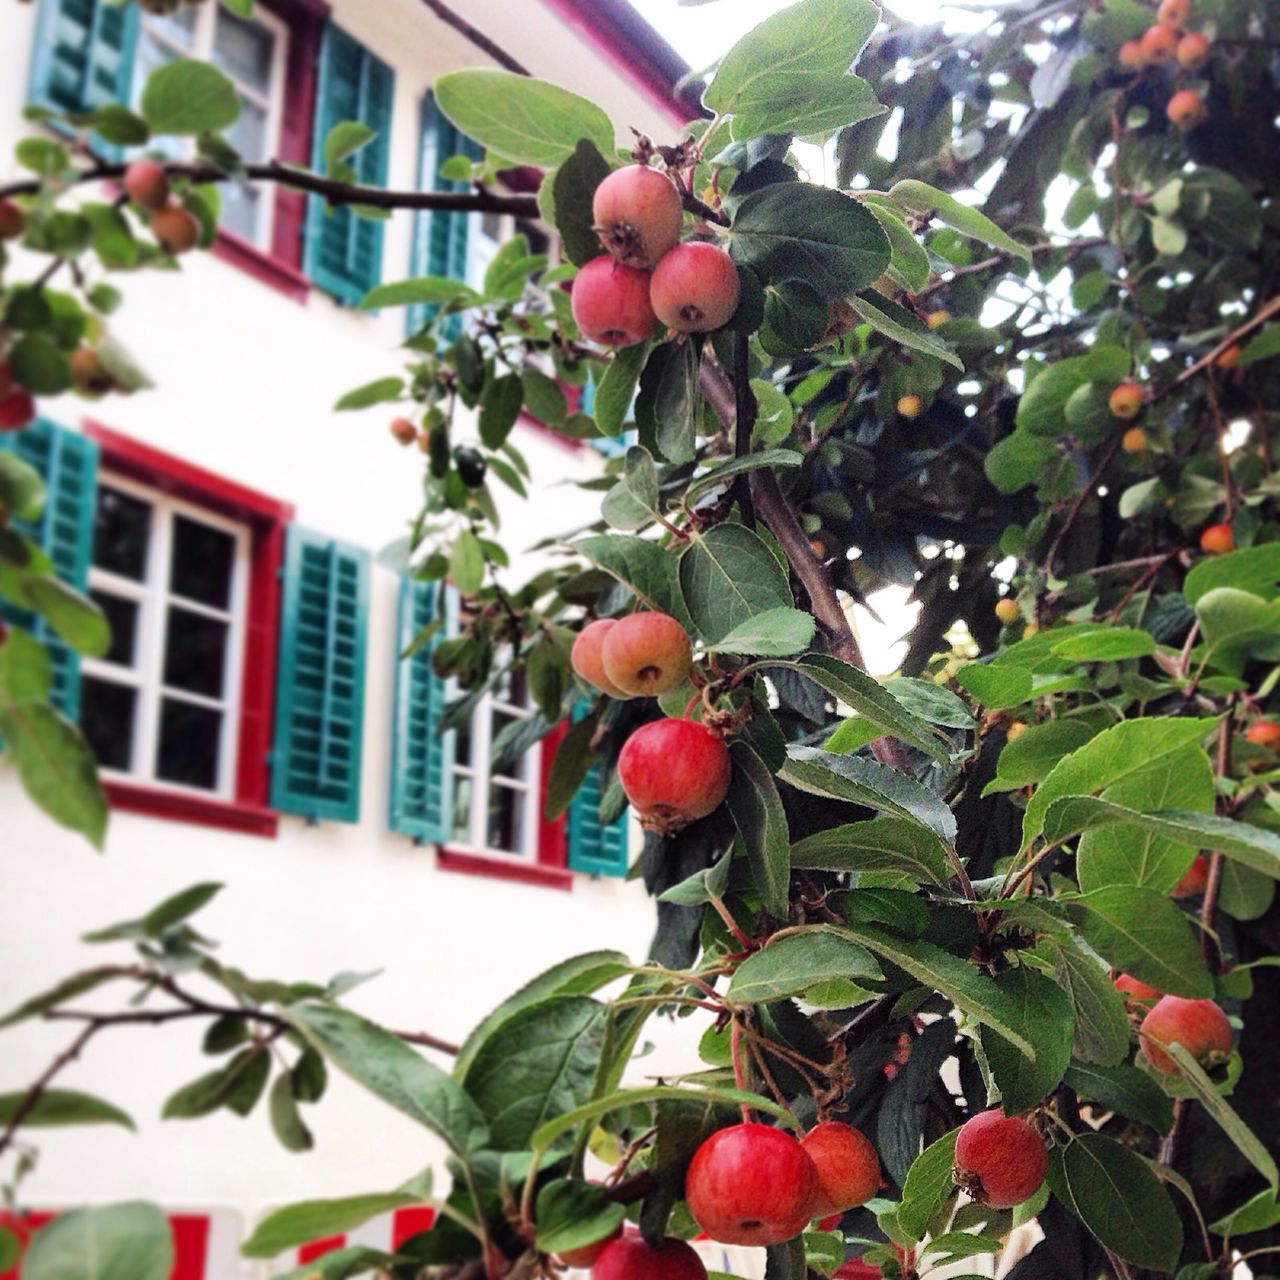 fruit, freshness, food and drink, tree, leaf, growth, red, building exterior, branch, built structure, focus on foreground, hanging, architecture, low angle view, healthy eating, food, close-up, day, nature, plant